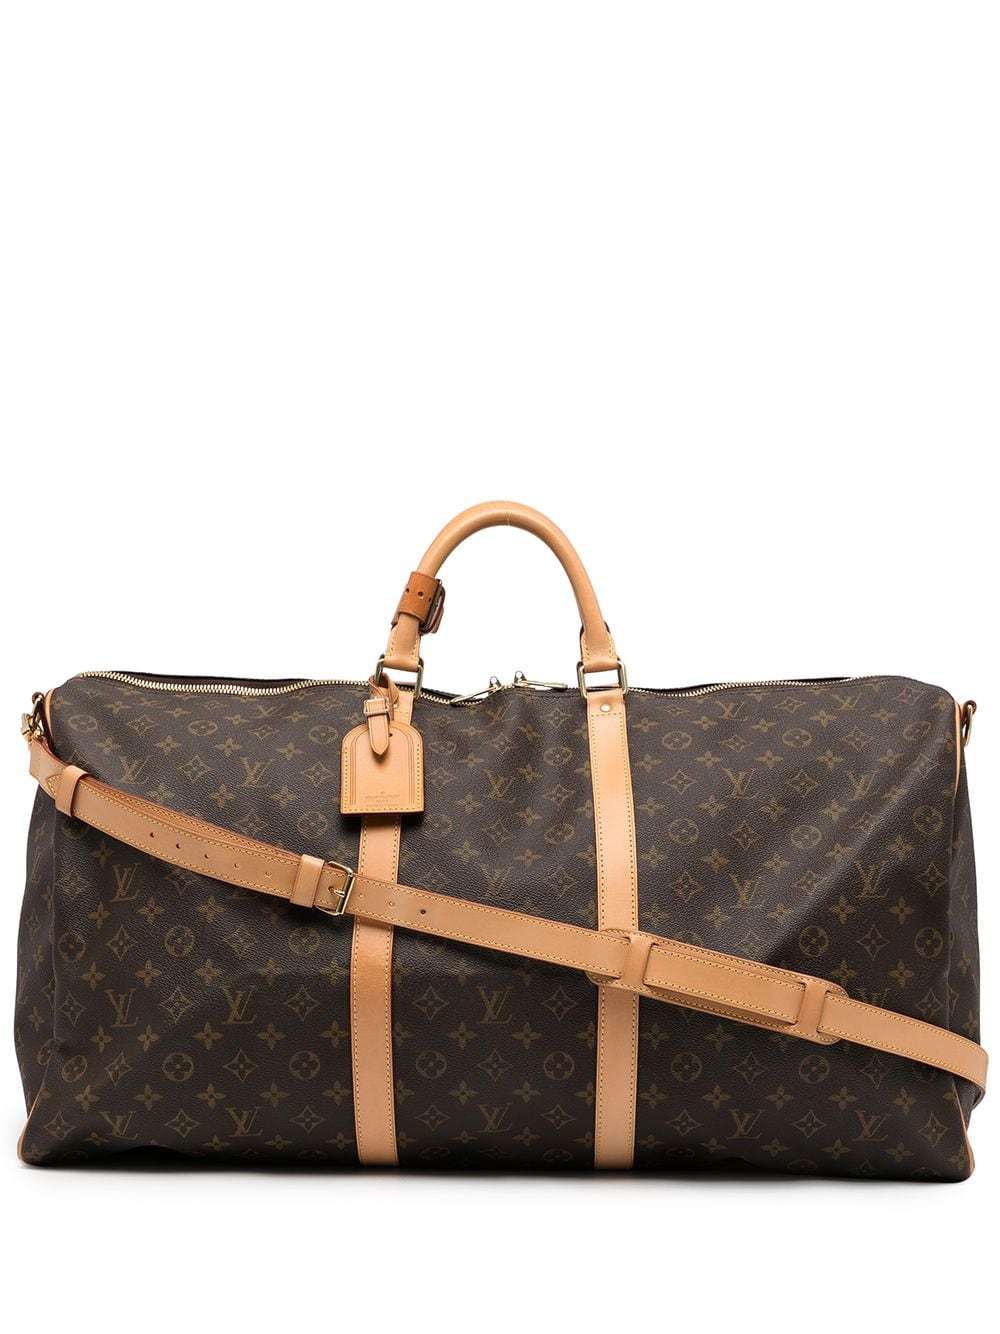 2008 pre-owned Keepall 60 Bandouliere 2way bag